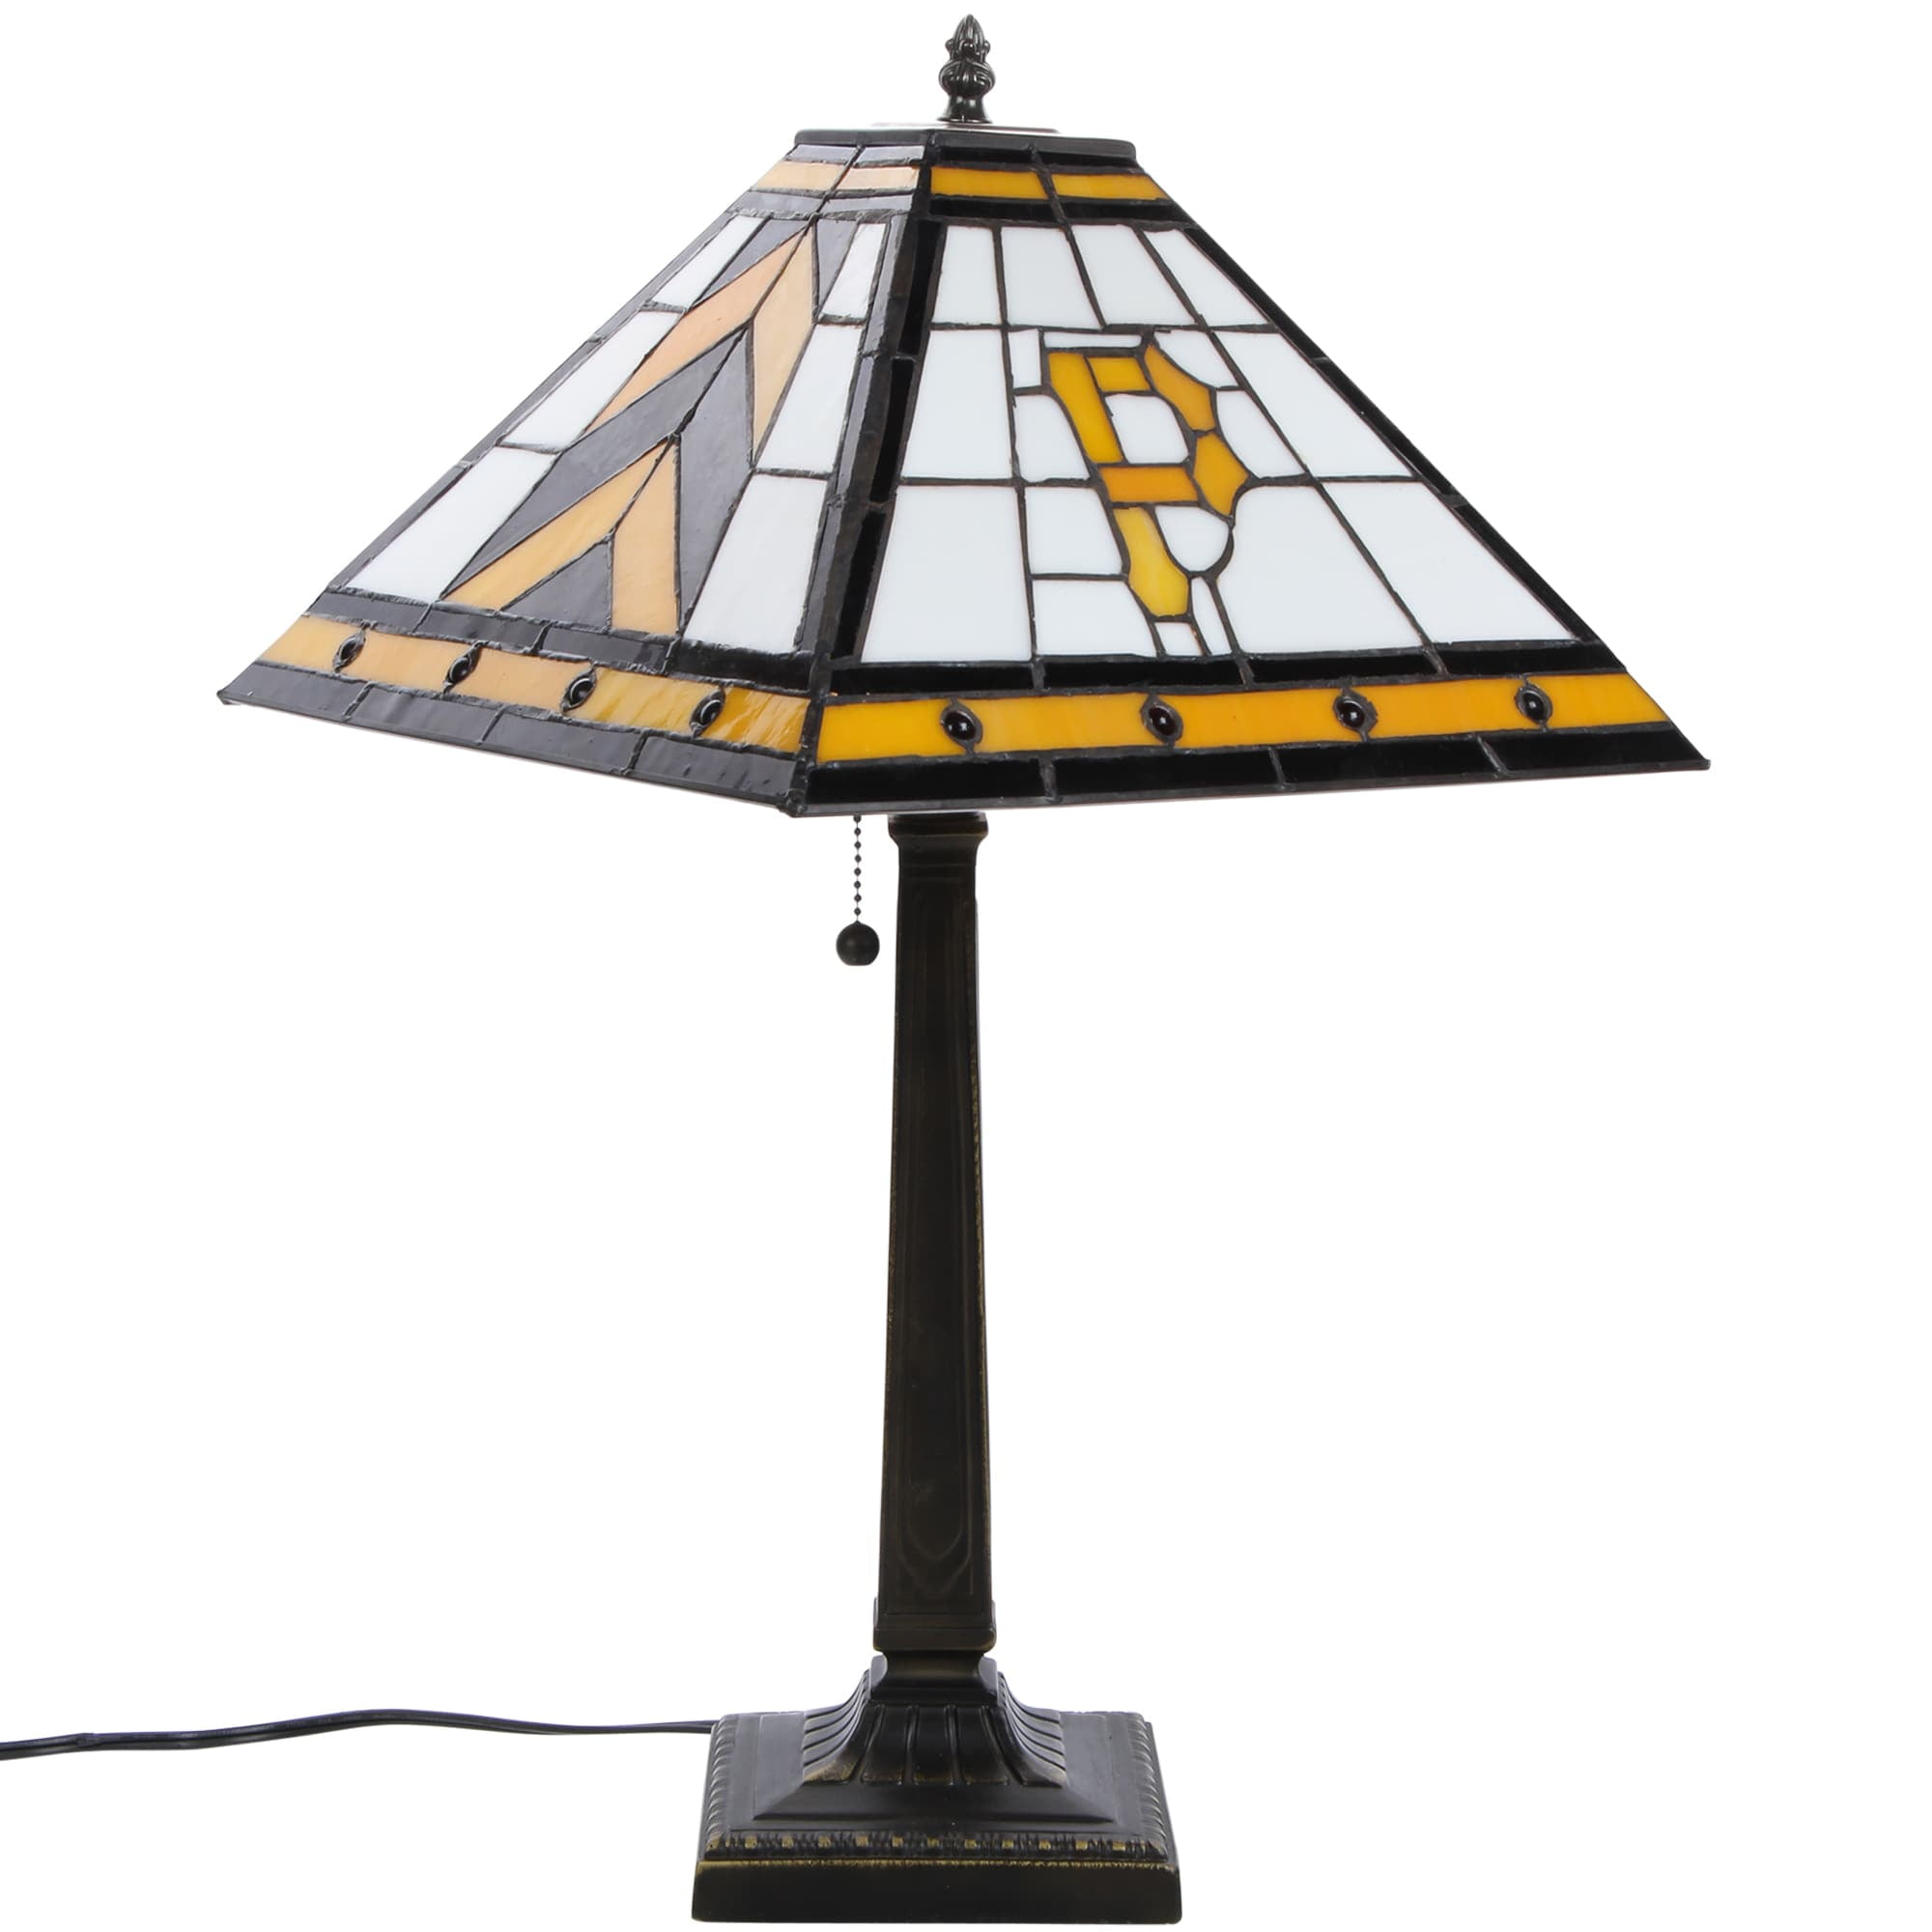 Table Lamp with Shade Pittsburgh PS Your Favorite Team Plate Rolled in on The lamp Base 